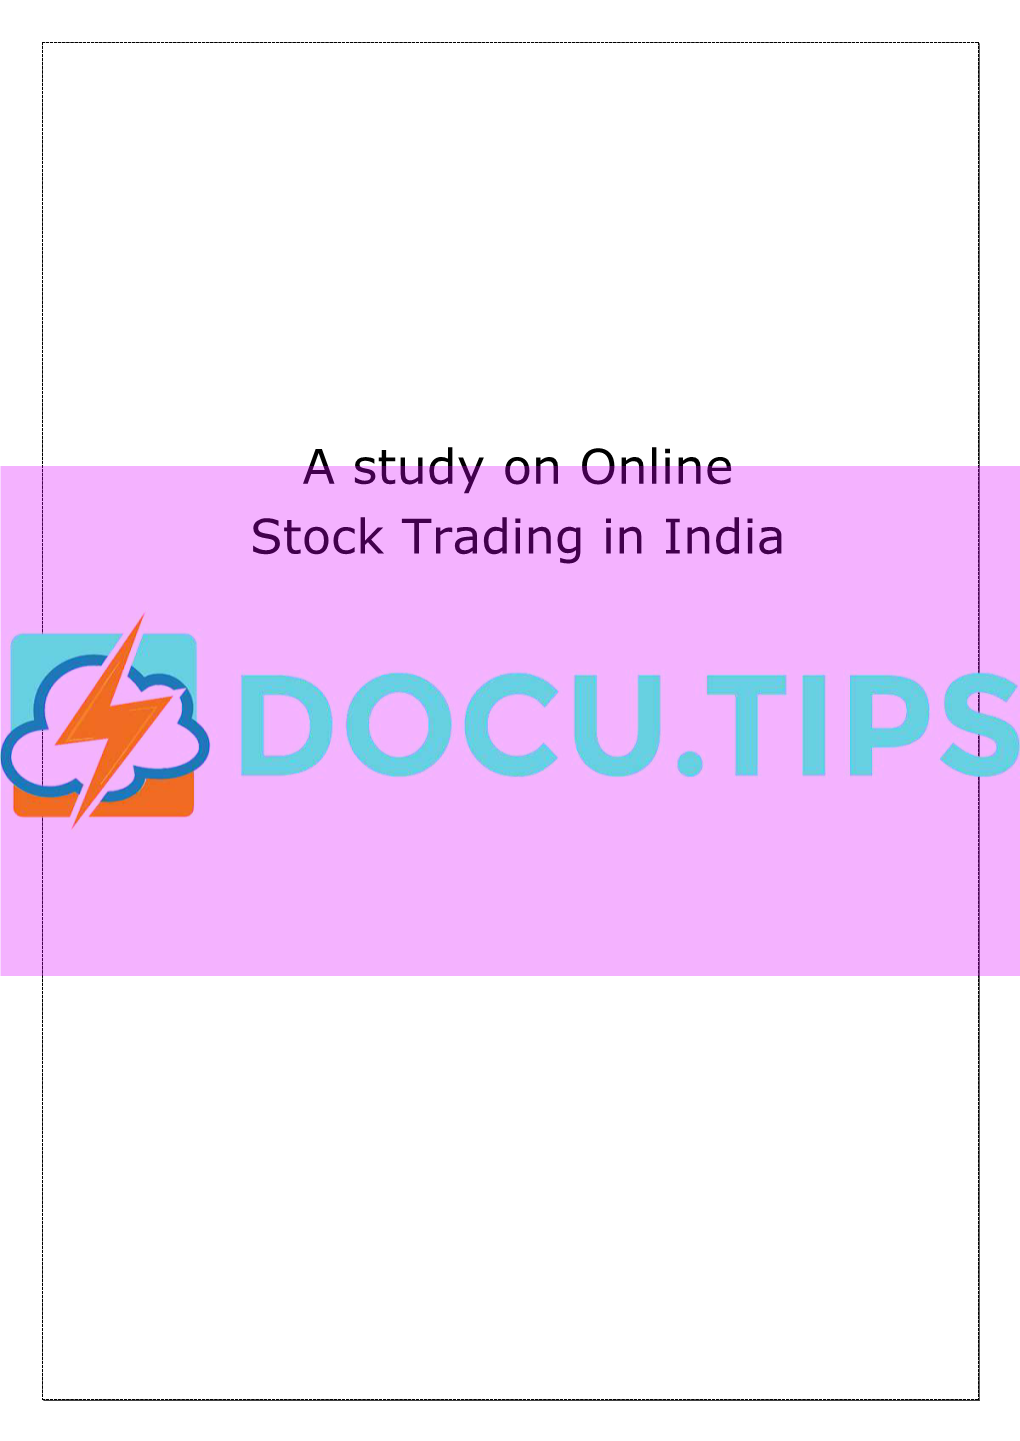 A Study on Online Stock Trading in India